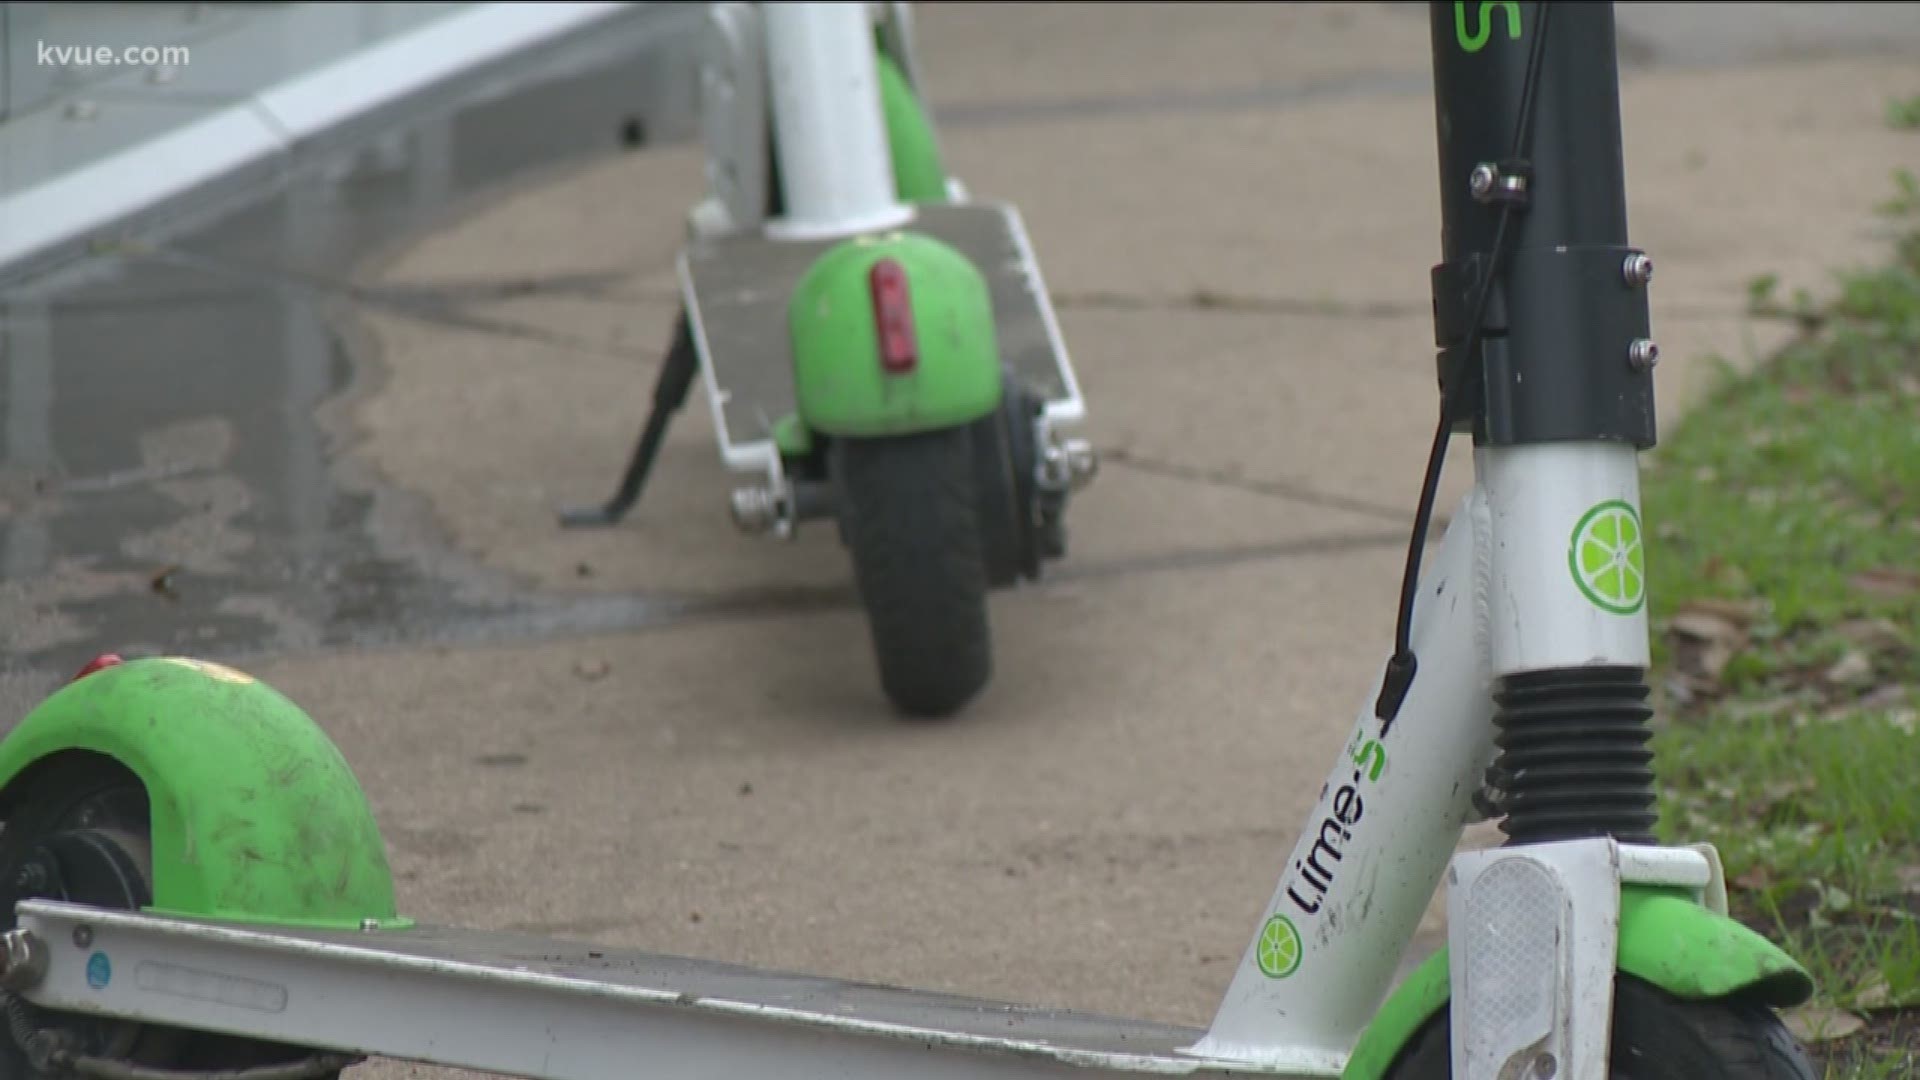 2018 could be known as the year dockless scooters took over Austin, but with the scooters came some issues. What are the numbers on these scooters?